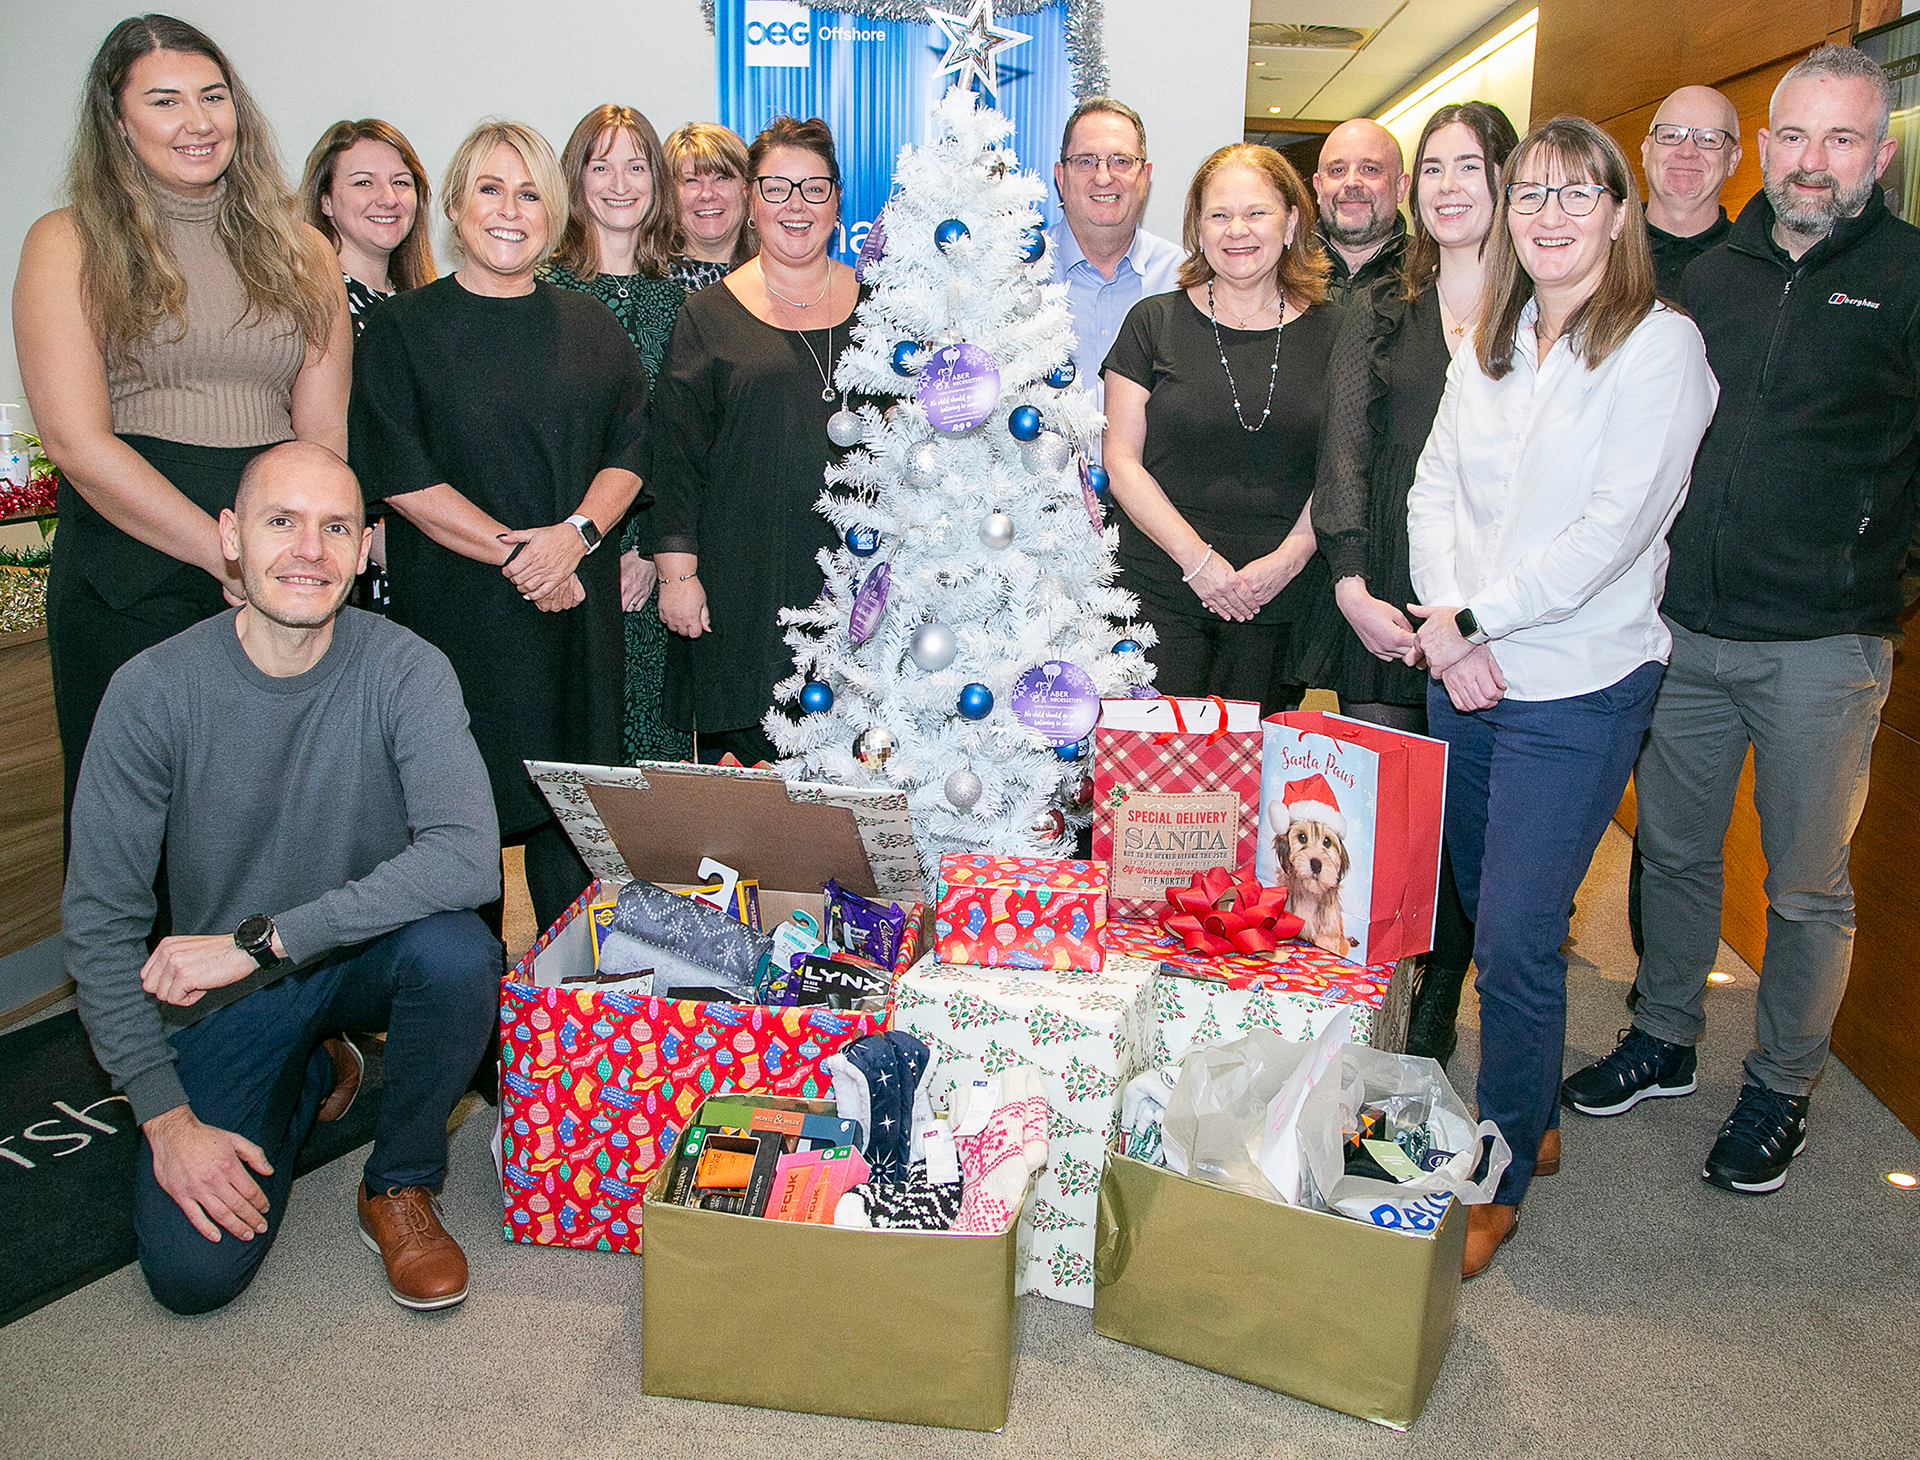 OEG UK Team with donations for AberNecessities